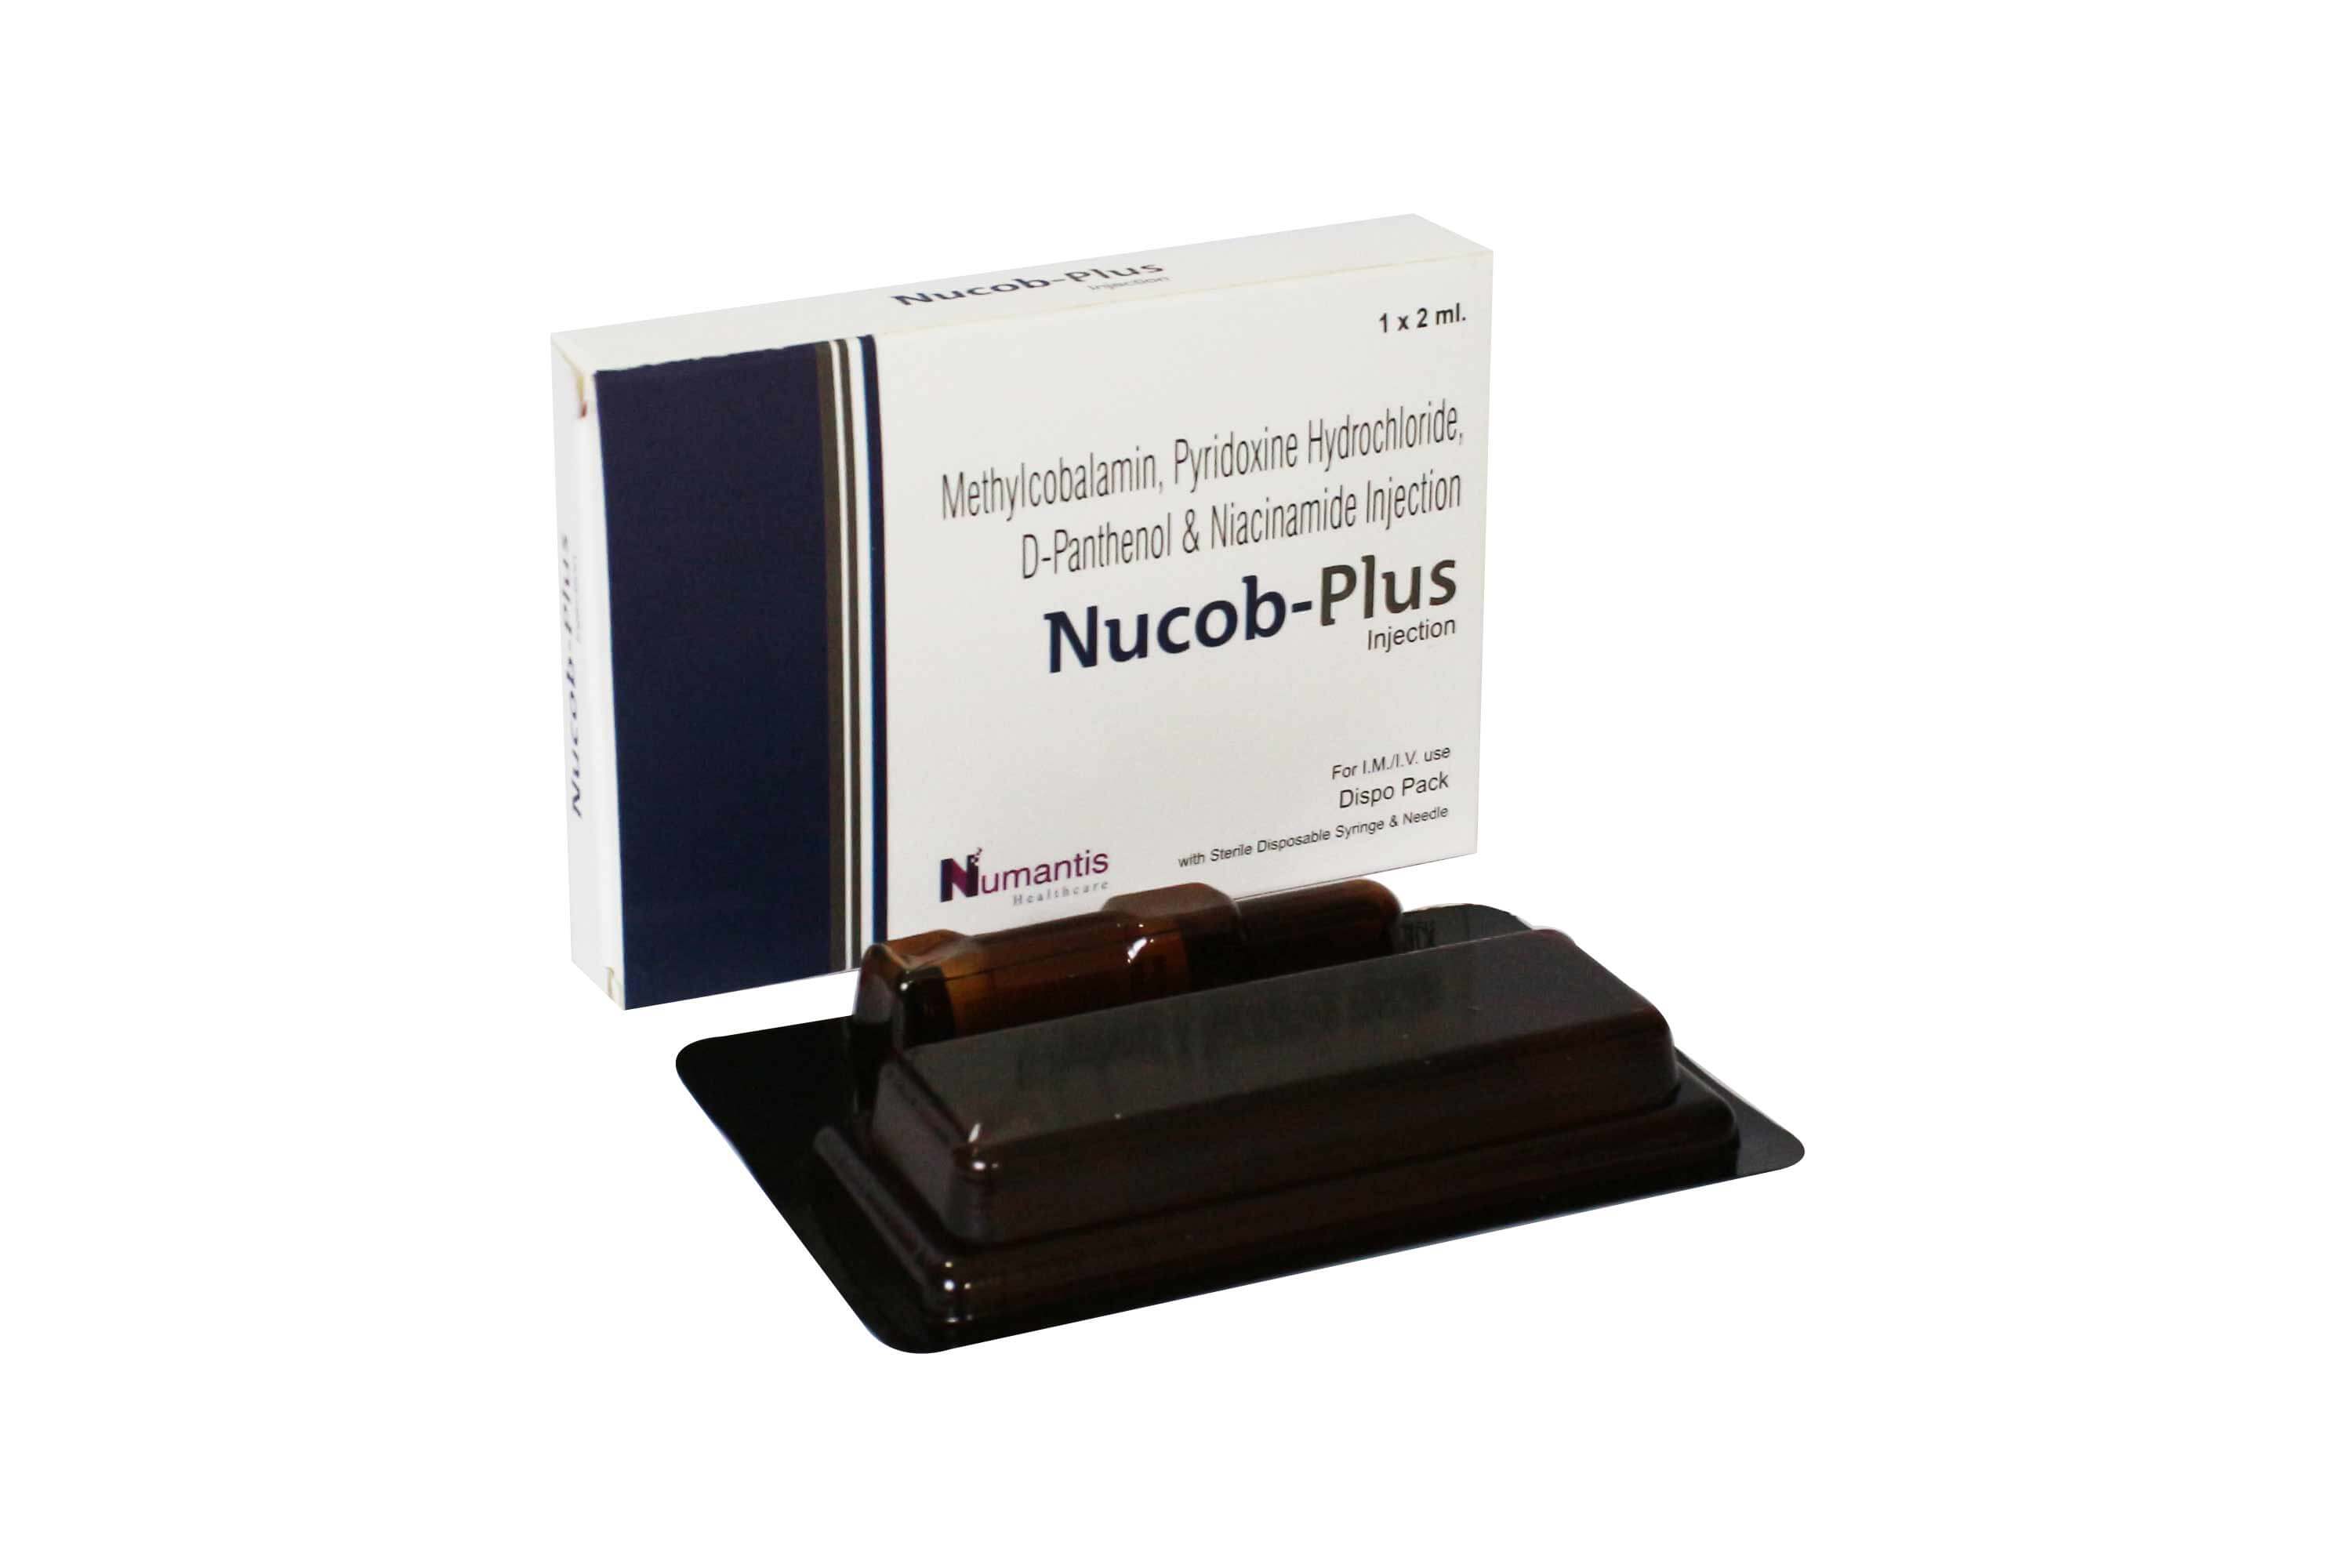 Product Name: Nucob Plus, Compositions of Nucob Plus are Methylcobalamin Pyridoxine Hydrochloride , D-Panthenol & Niacinamide Injection - Numantis Healthcare